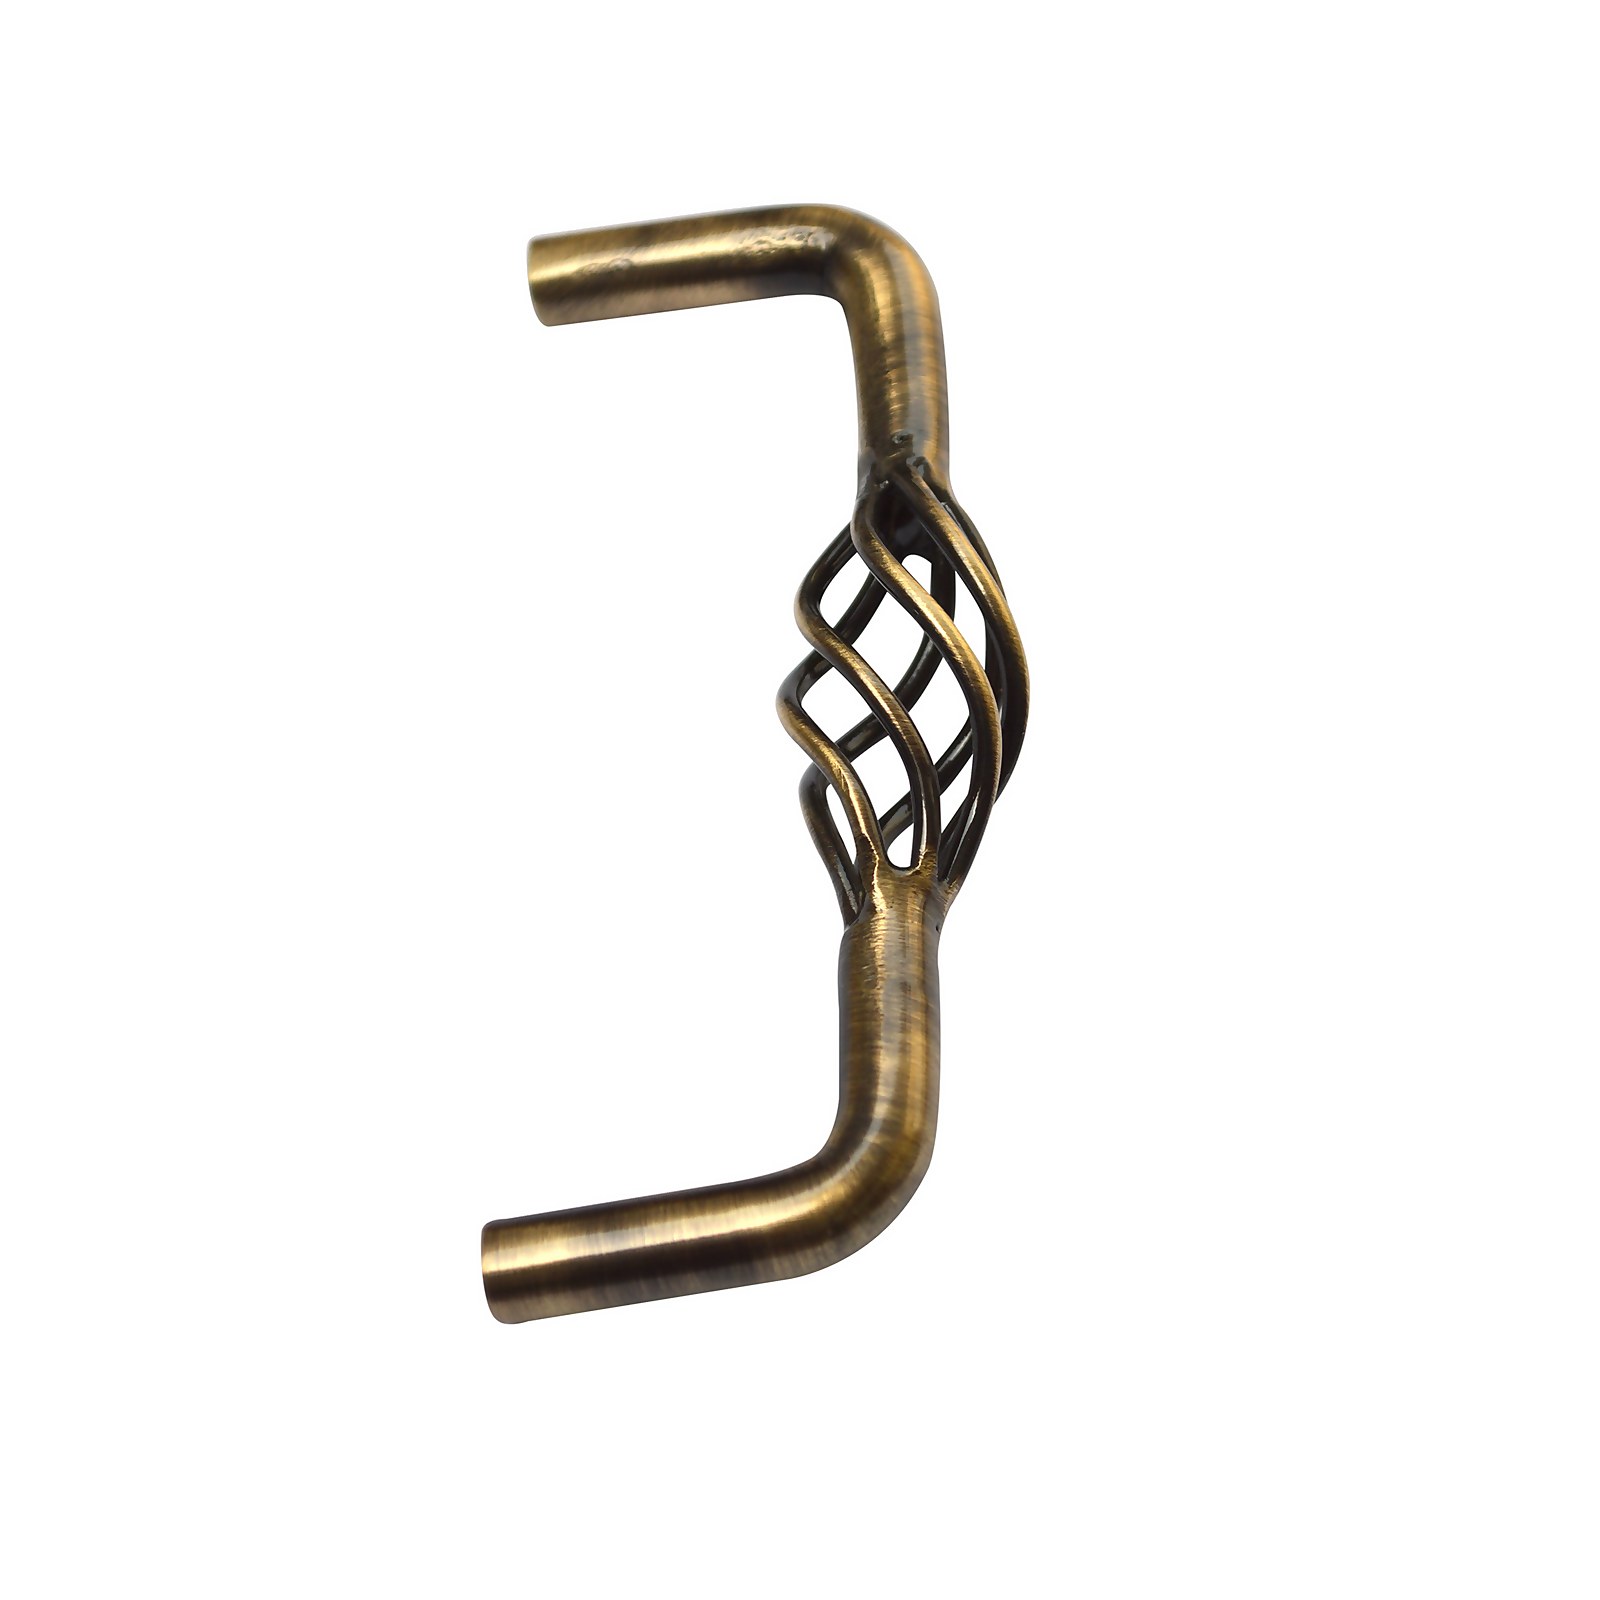 Photo of Twyford 96mm Steel Brass Cage Handle - 2 Pack